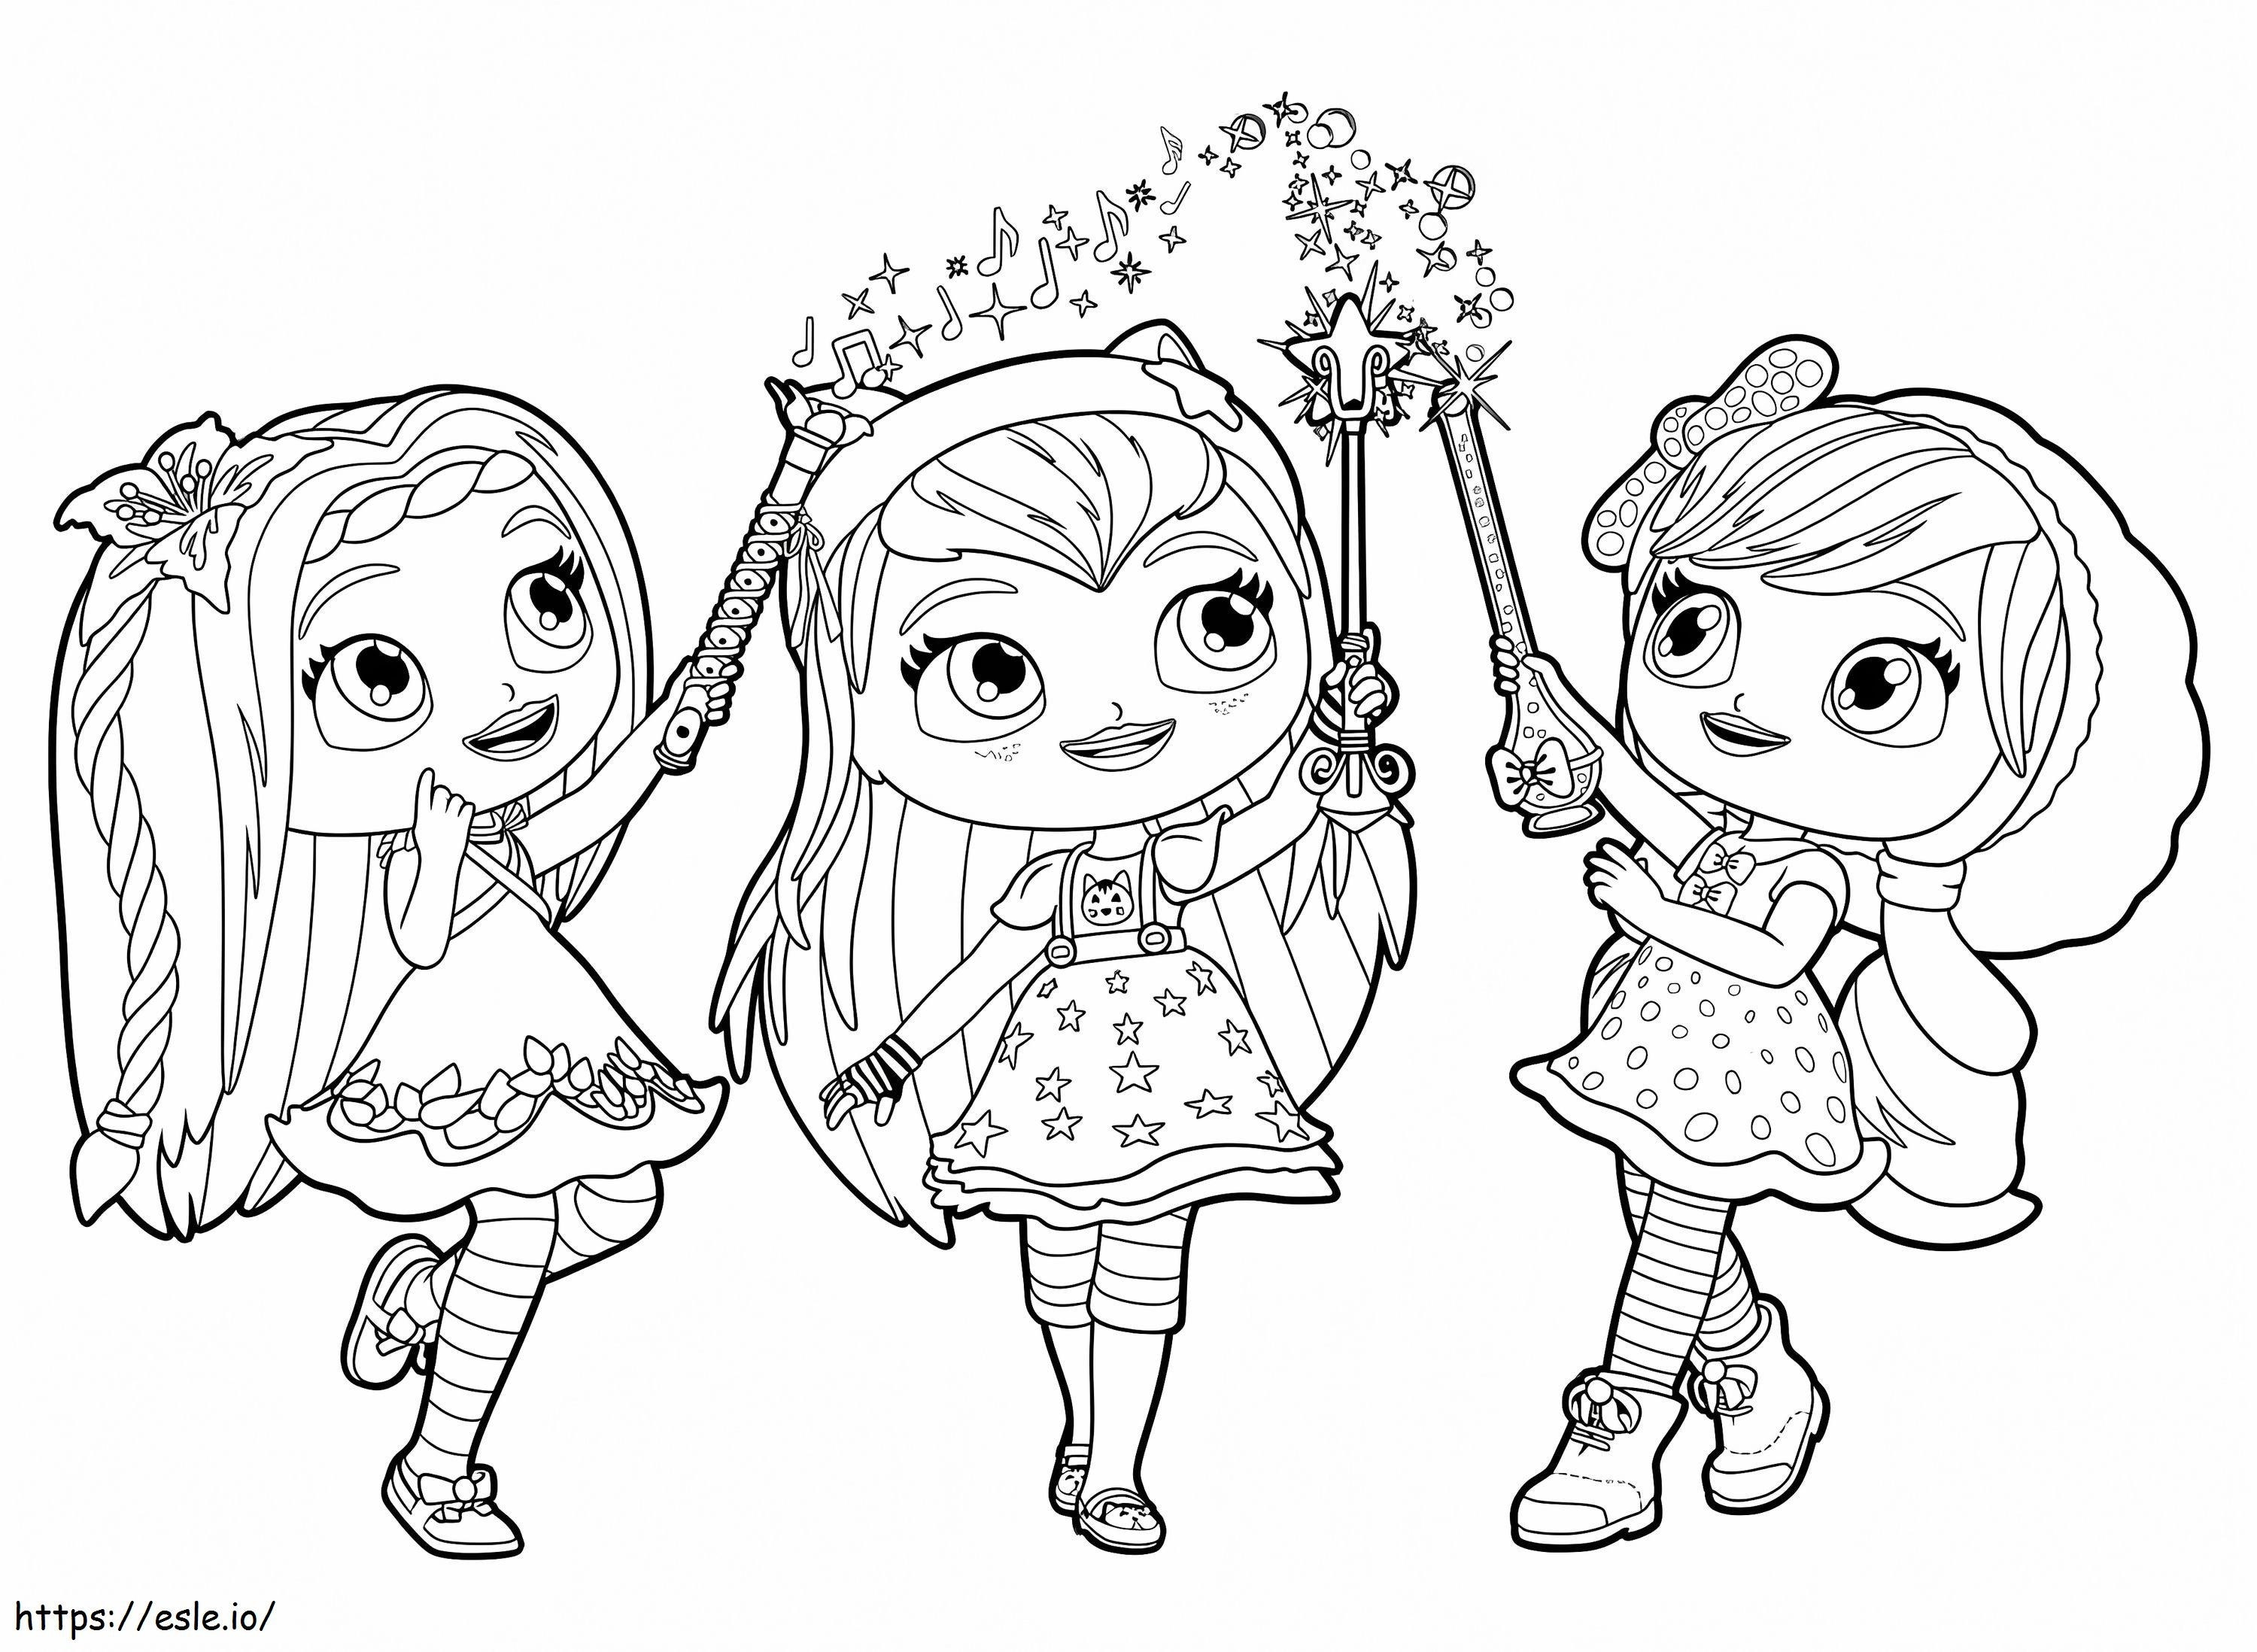 Magical Little Charmers coloring page